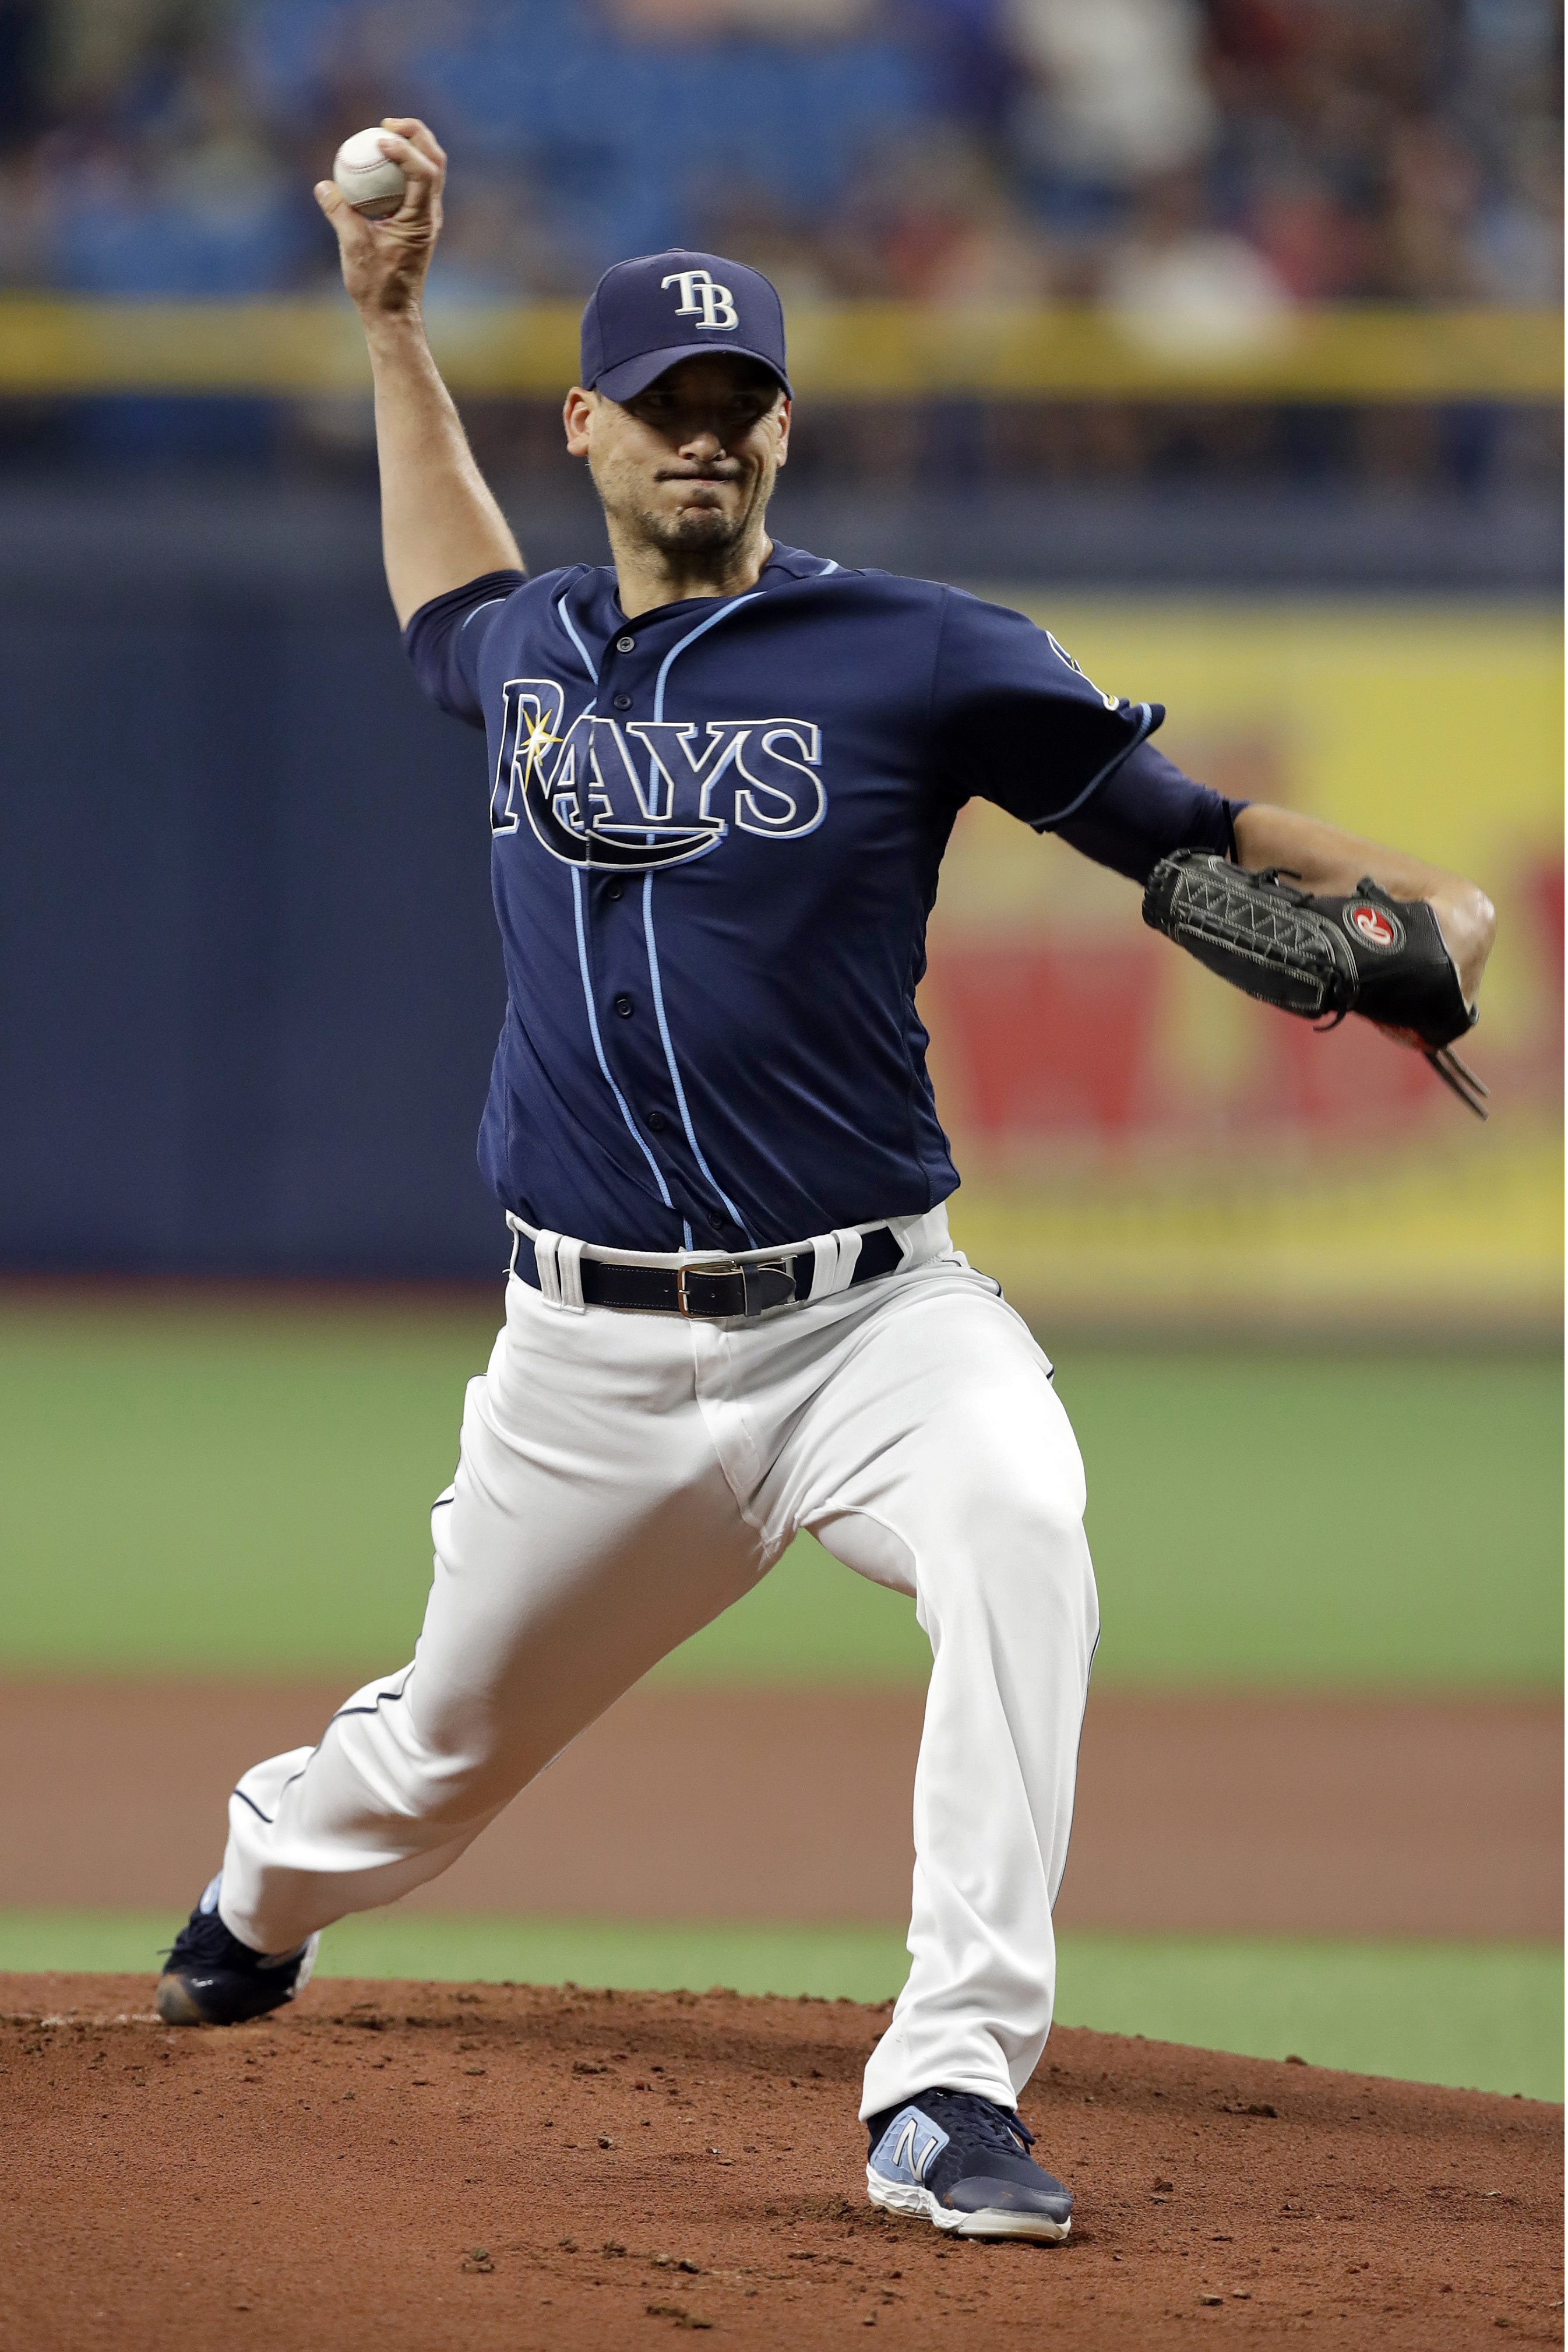 Rays beat Red Sox 3-2 as Boston files protest over lineup